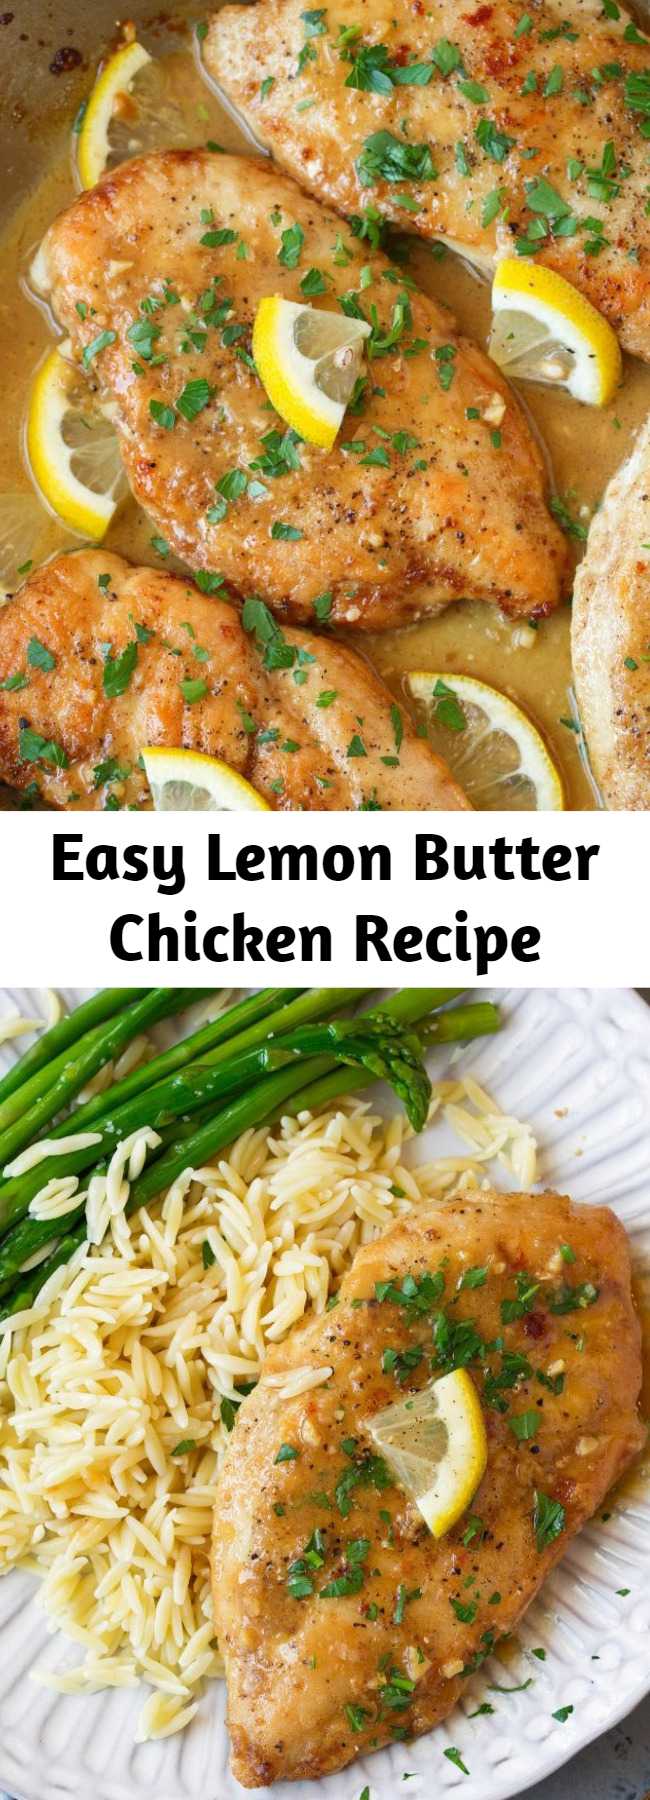 Easy Lemon Butter Chicken Recipe - The easiest yet tastiest chicken recipe! Pan seared chicken breasts are coated with a bright, tangy and rich lemon butter sauce that will leave you craving more! Perfect recipe for busy weeknights. Serve with orzo and asparagus to complete the meal. #lemon #chicken #chickenbreasts #dinnerideas #recipe